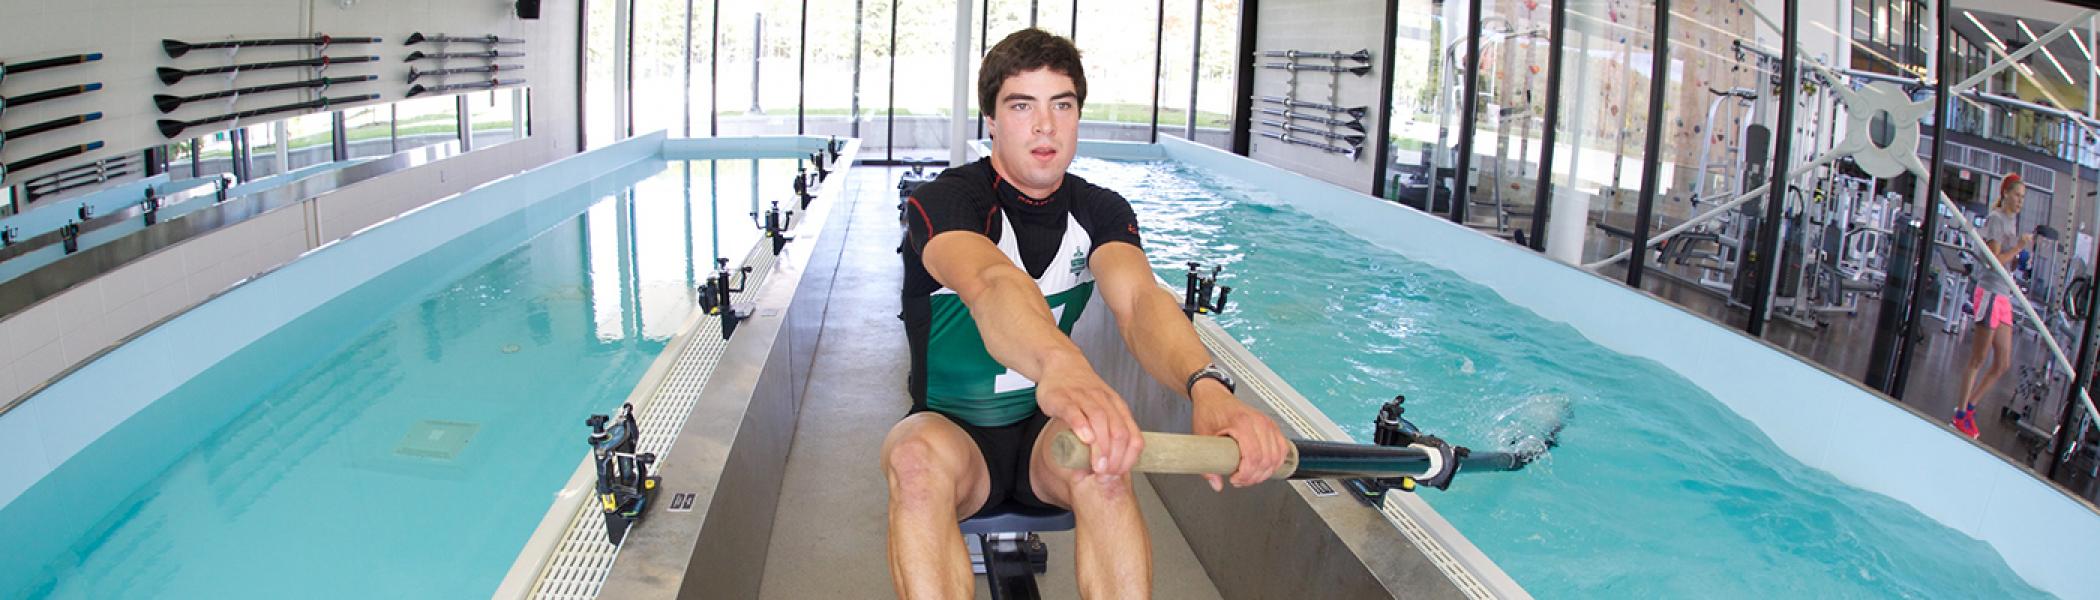 Student in the rowing tank at the Athletic Centre practicing his strokes